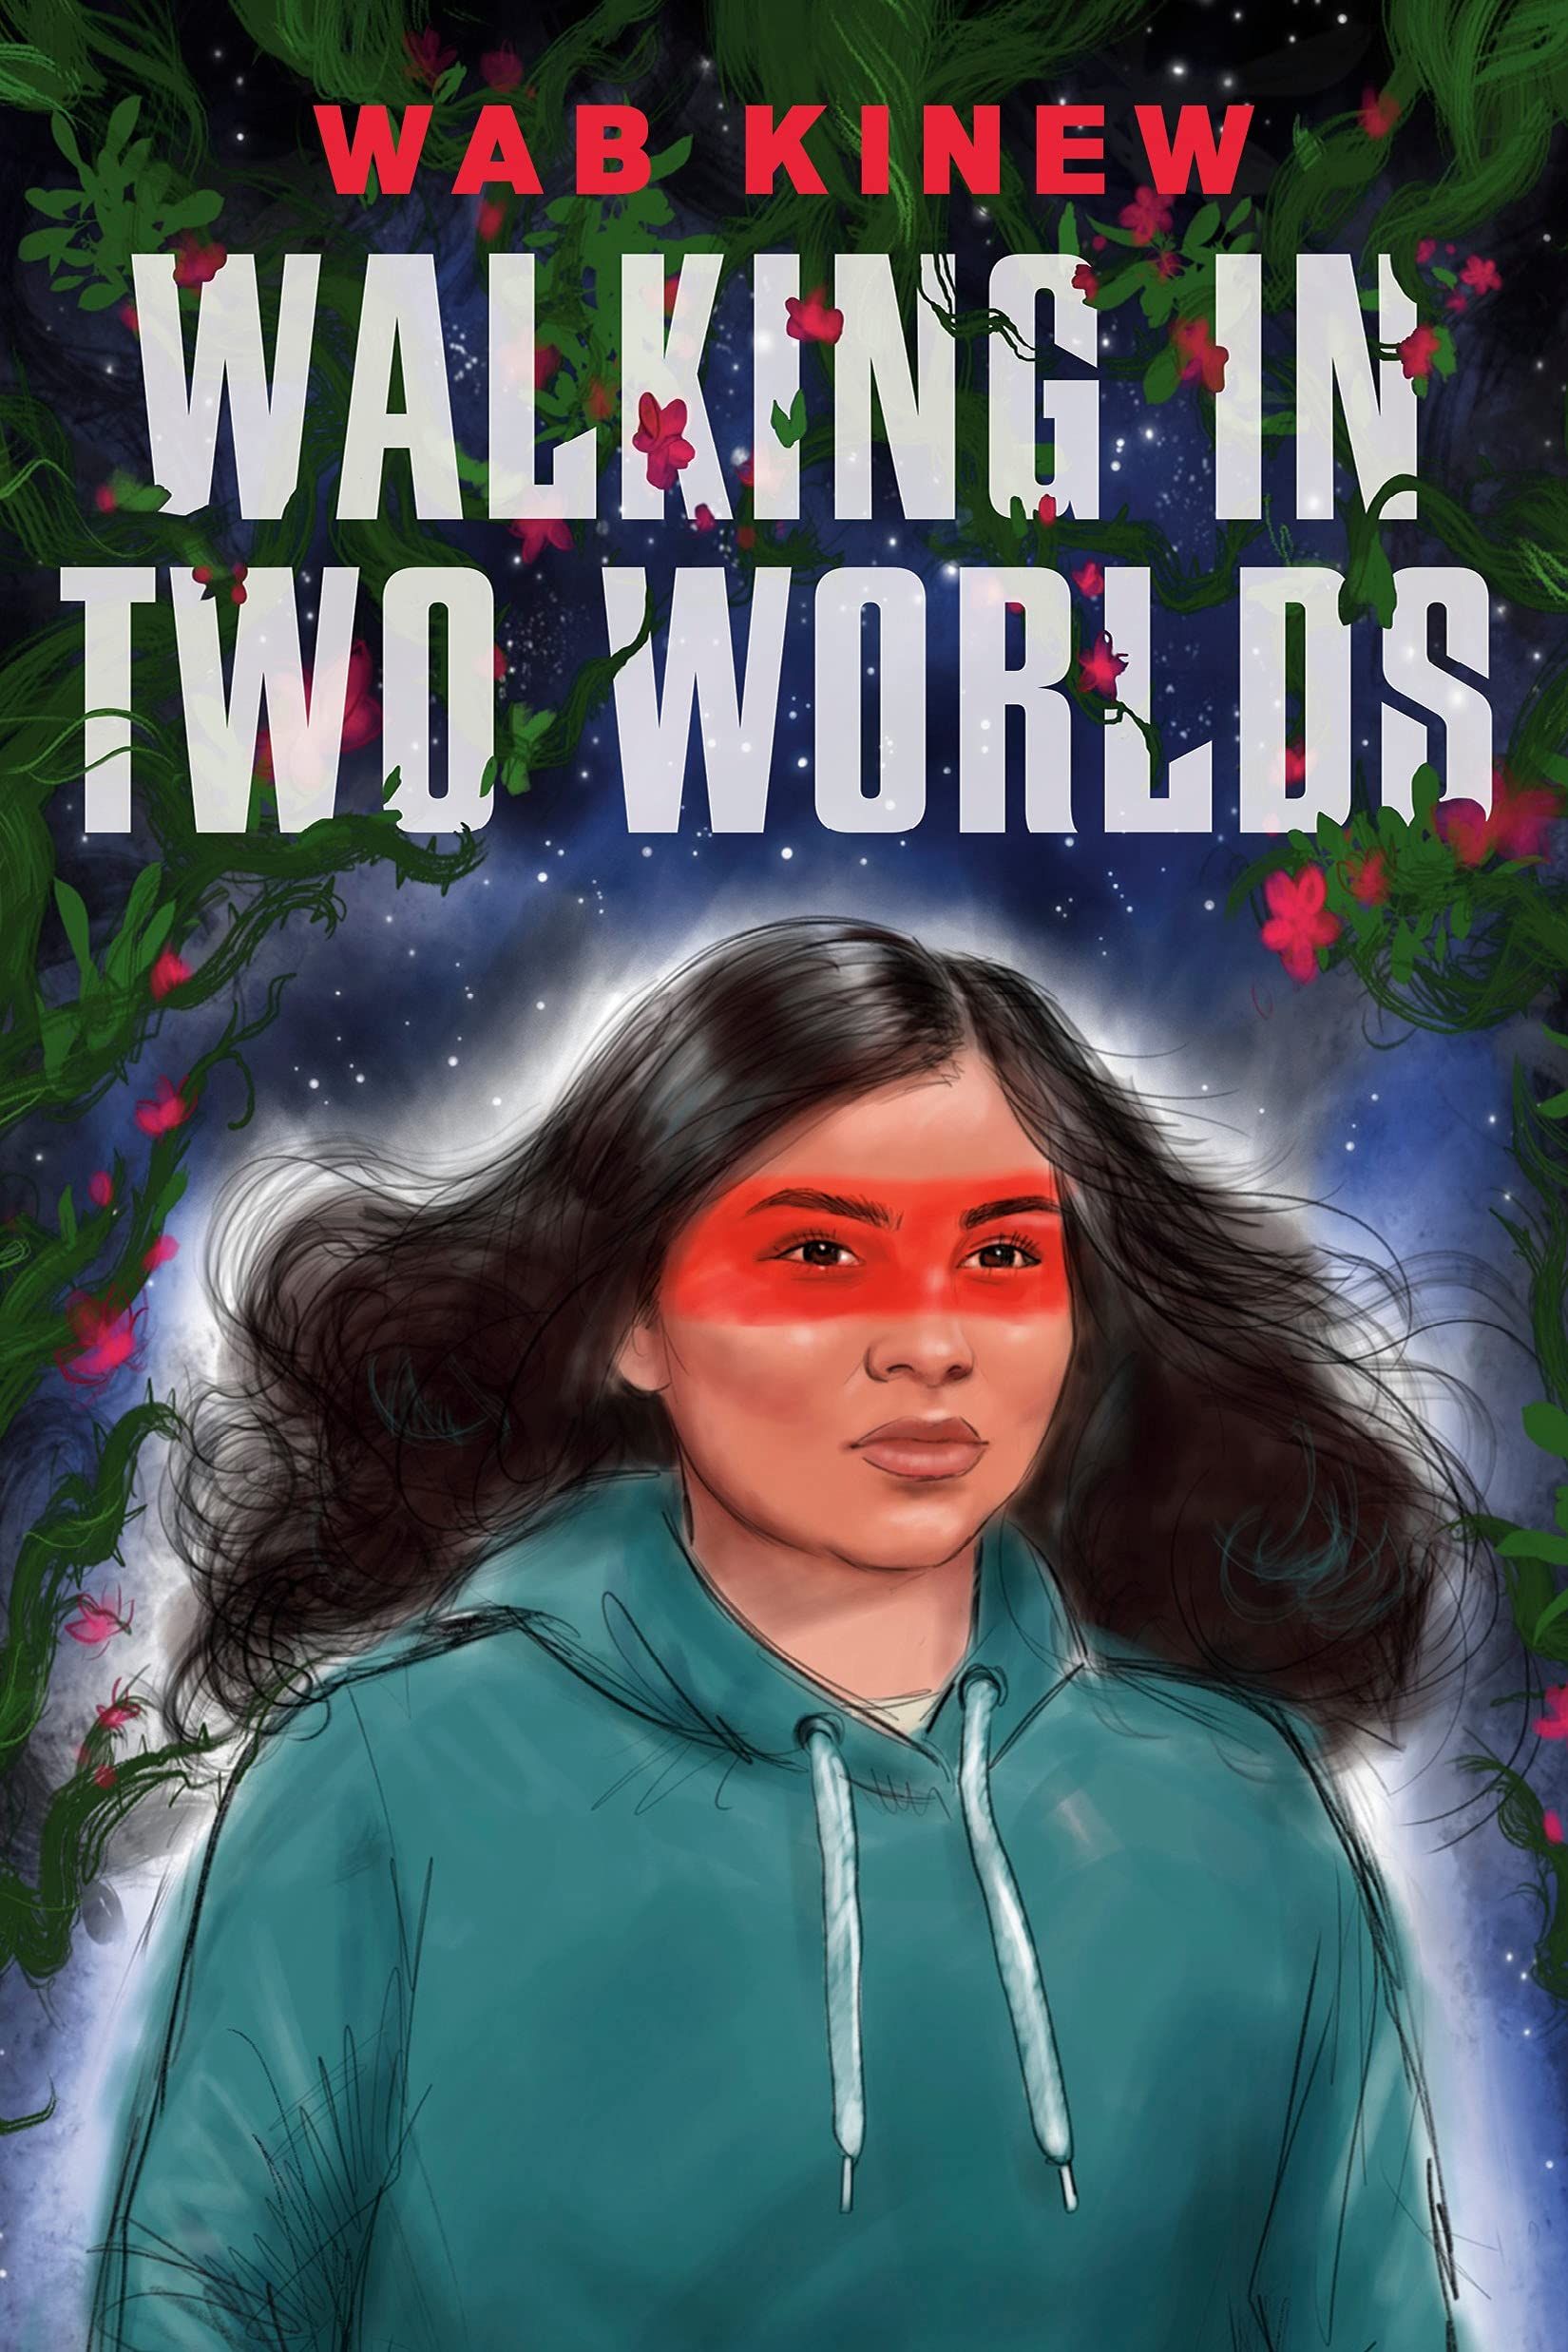 Cover of "Walking in Two Worlds" by Wab Kinew, with image of a young girl.